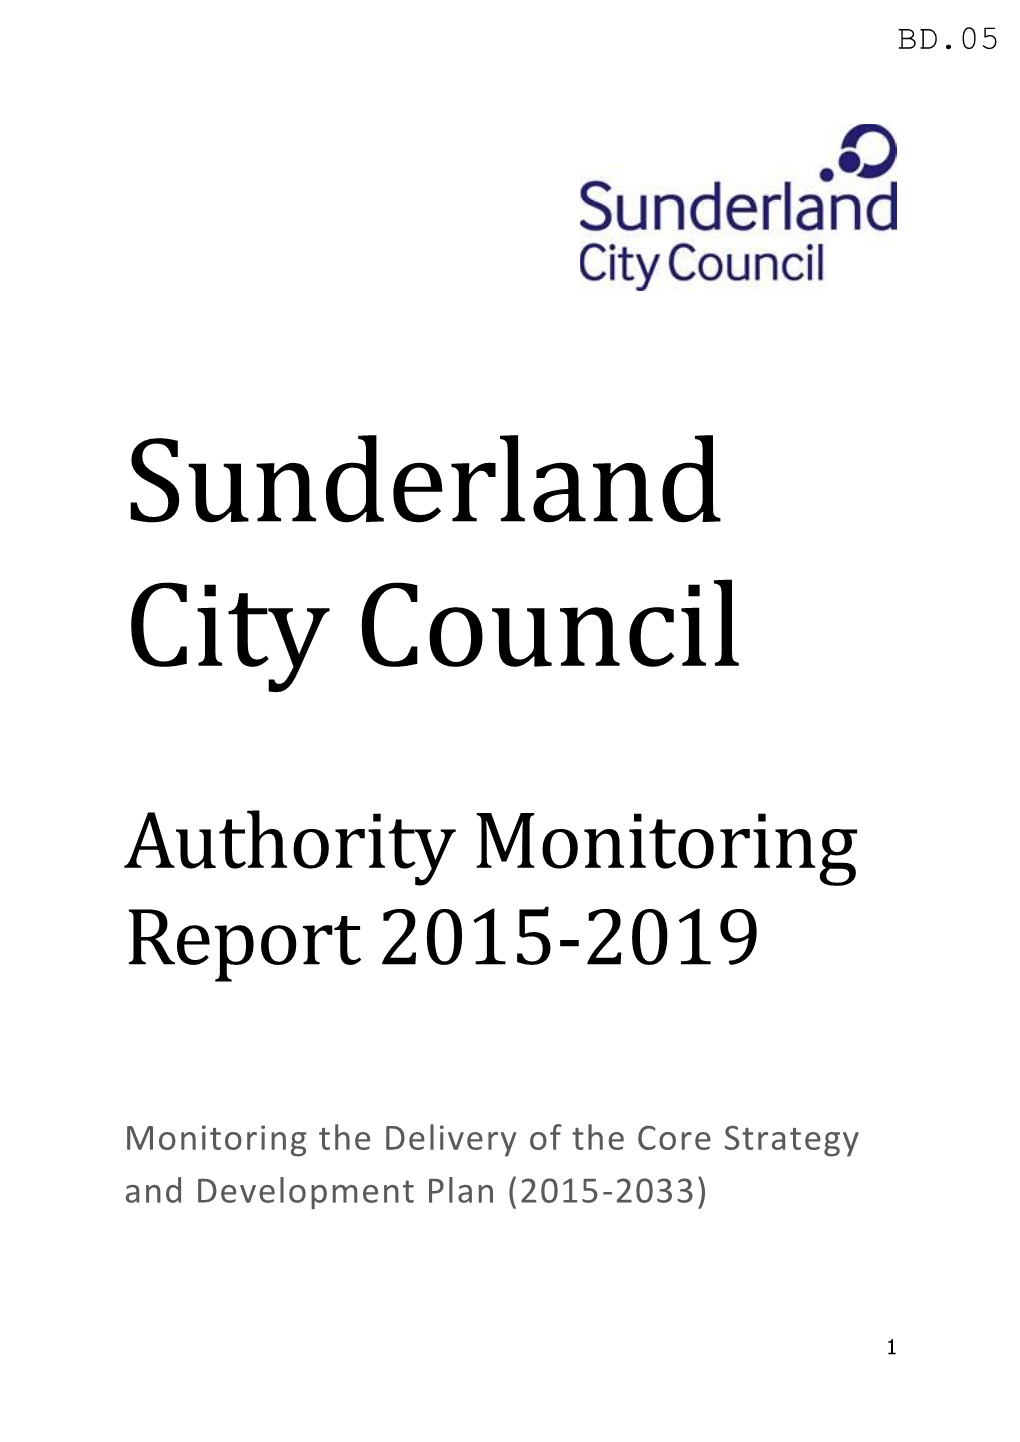 Authority Monitoring Report 2015-2019